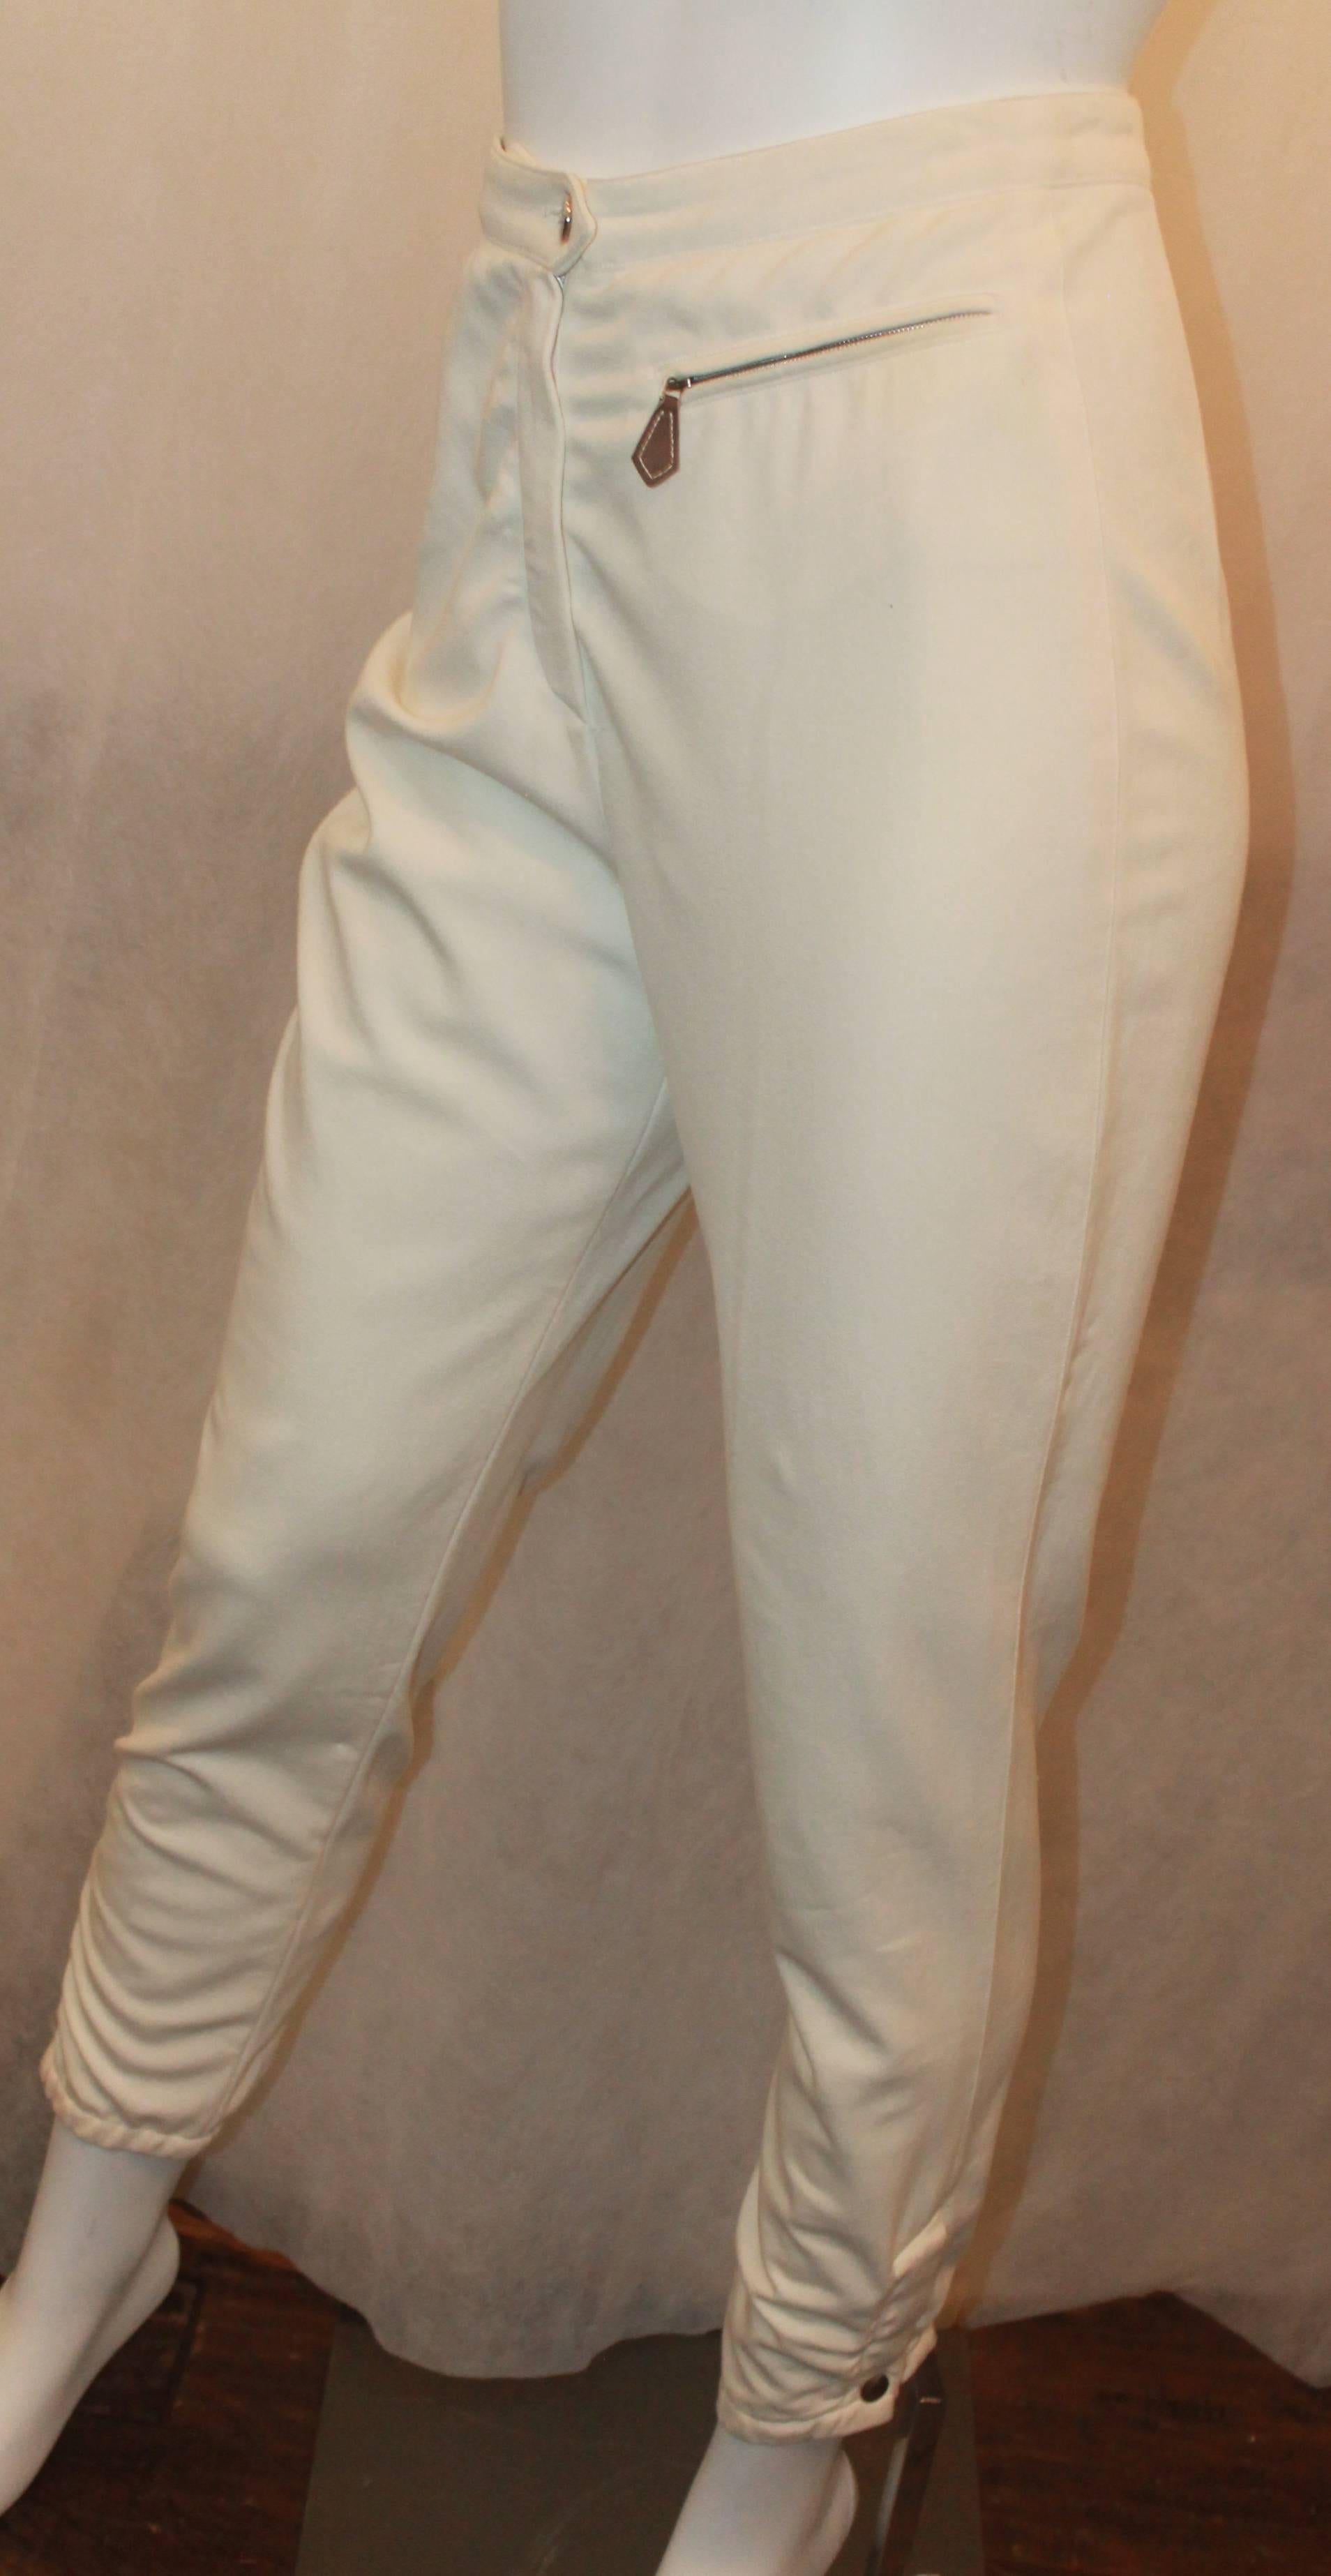 Hermes Ivory High Waisted Riding Pants - 34 - circa 1990's. These pants are in very good vintage condition with wear consistent with its age. They have a bunched bottom with a pocket that has a zipper with leather on it. 

Measurements:
Waist-